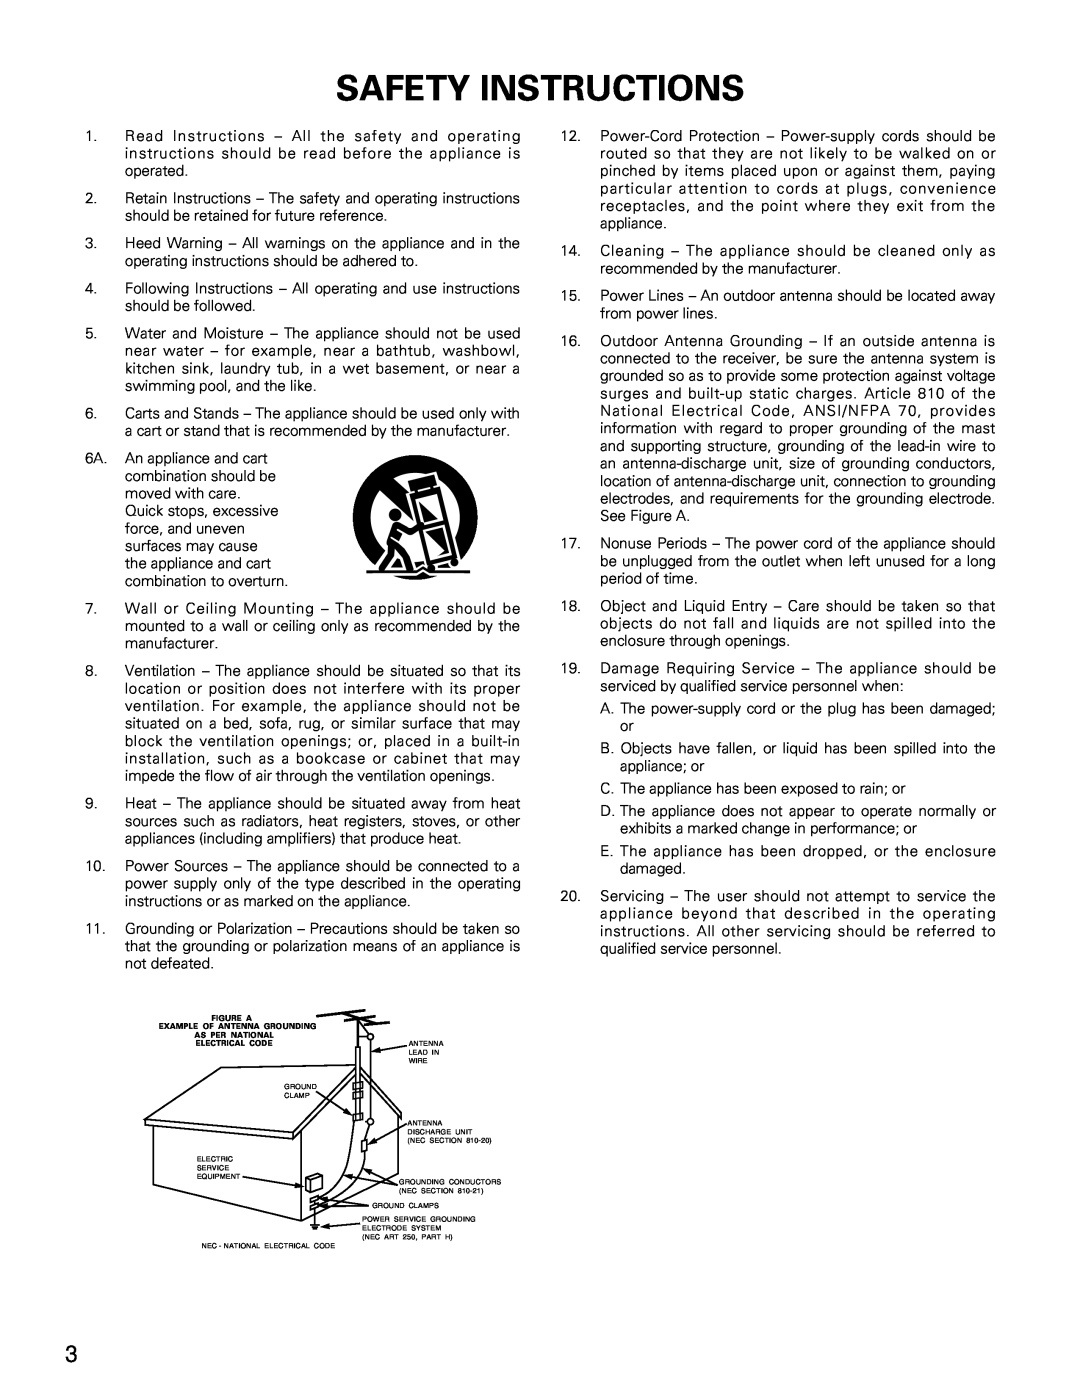 Denon DN-H800 operating instructions Safety Instructions 